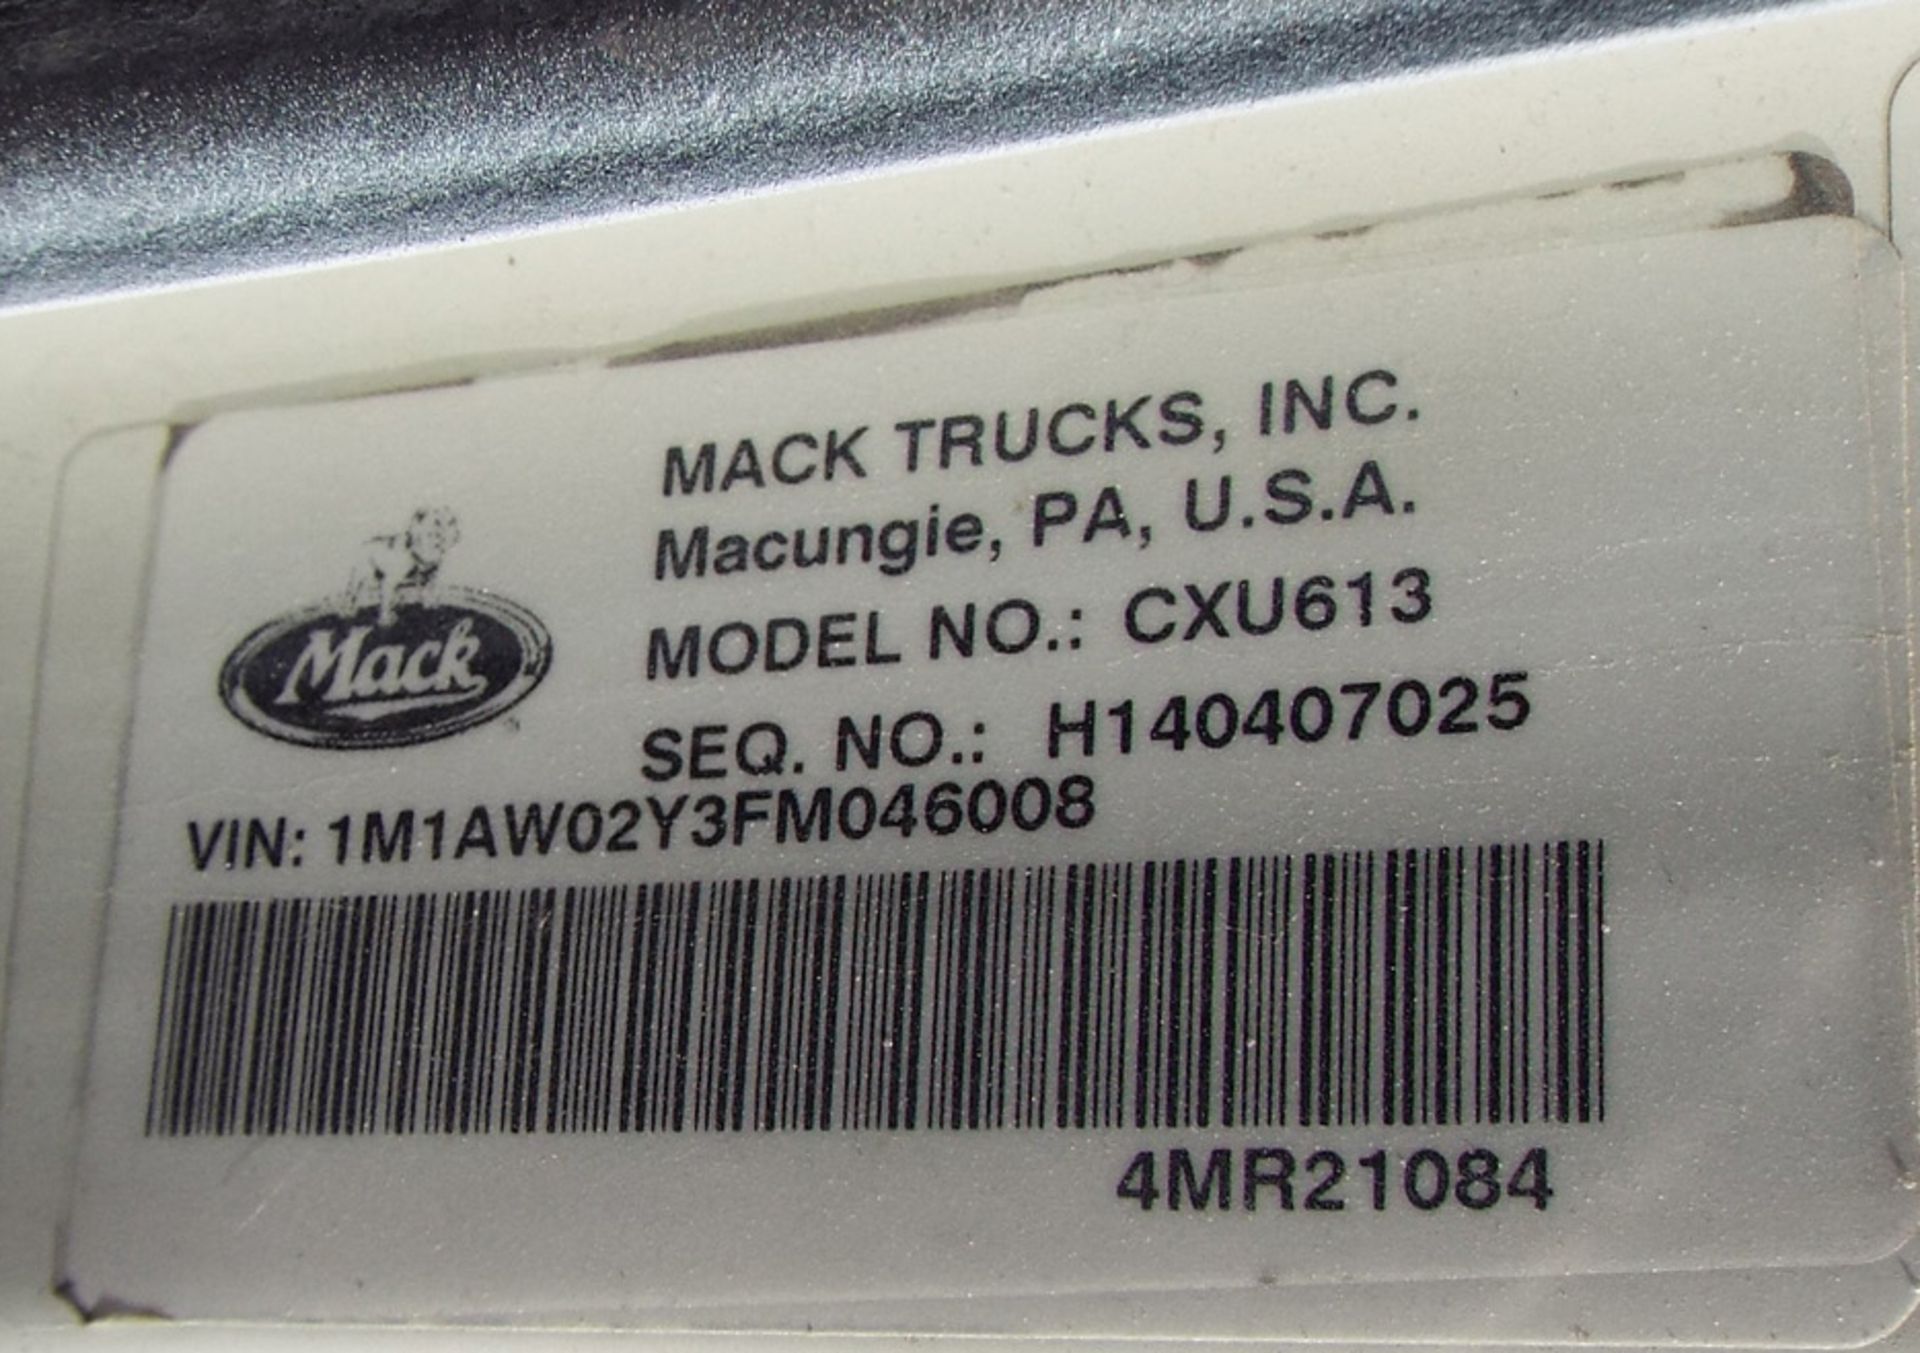 MACK (2015) CXU613 DAY CAB TRUCK WITH 405HP MP7 DIESEL ENGINE, 10 SPEED EATON FULLER TRANSMISSION, - Image 13 of 13